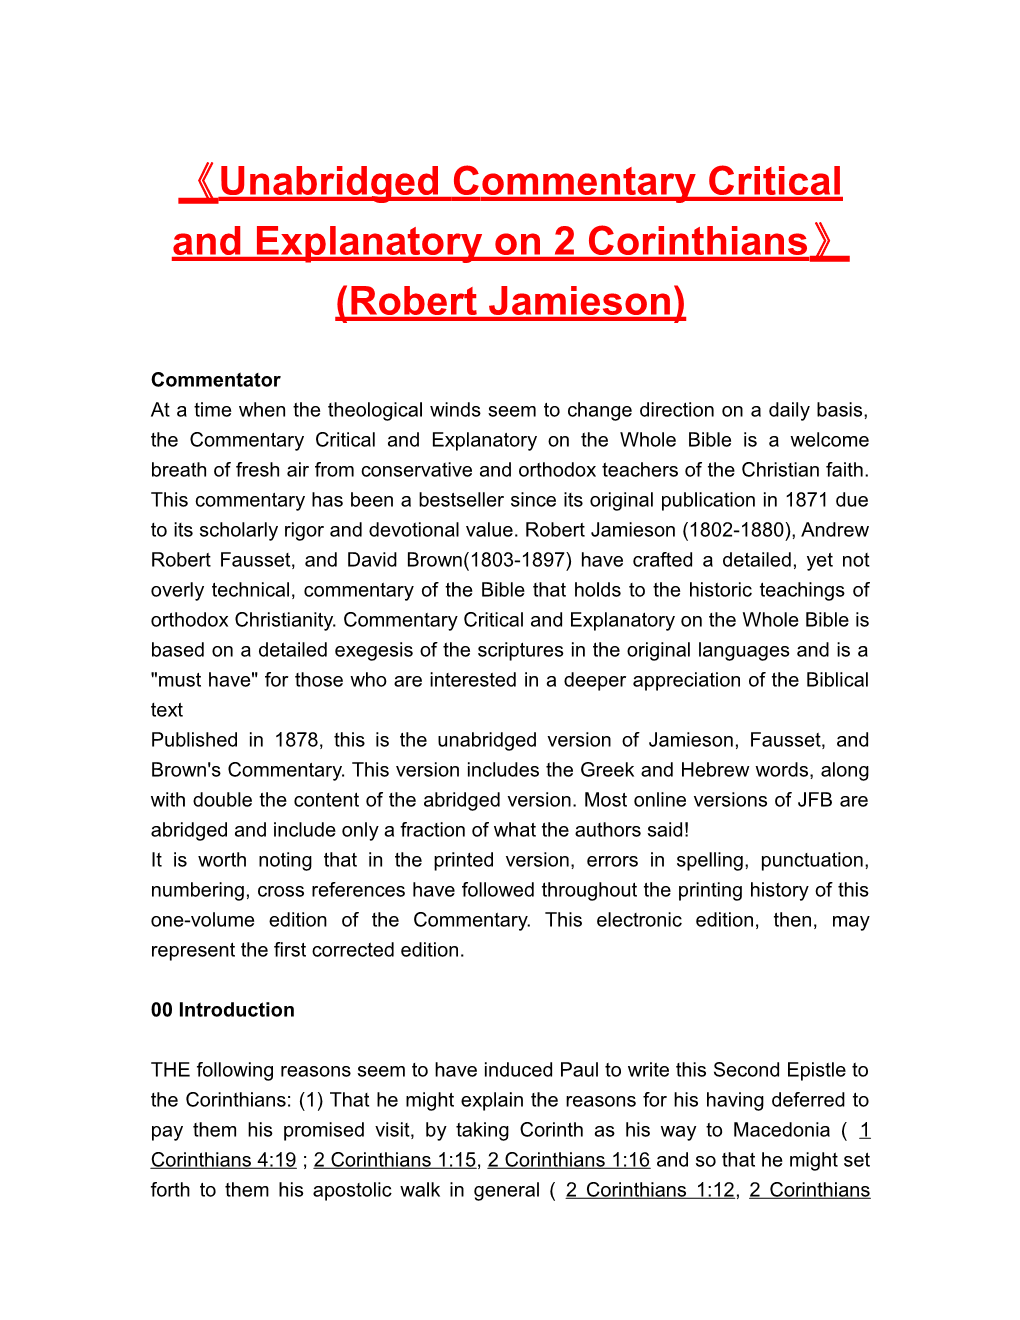 Unabridged Commentary Critical and Explanatory on 2 Corinthians (Robert Jamieson)